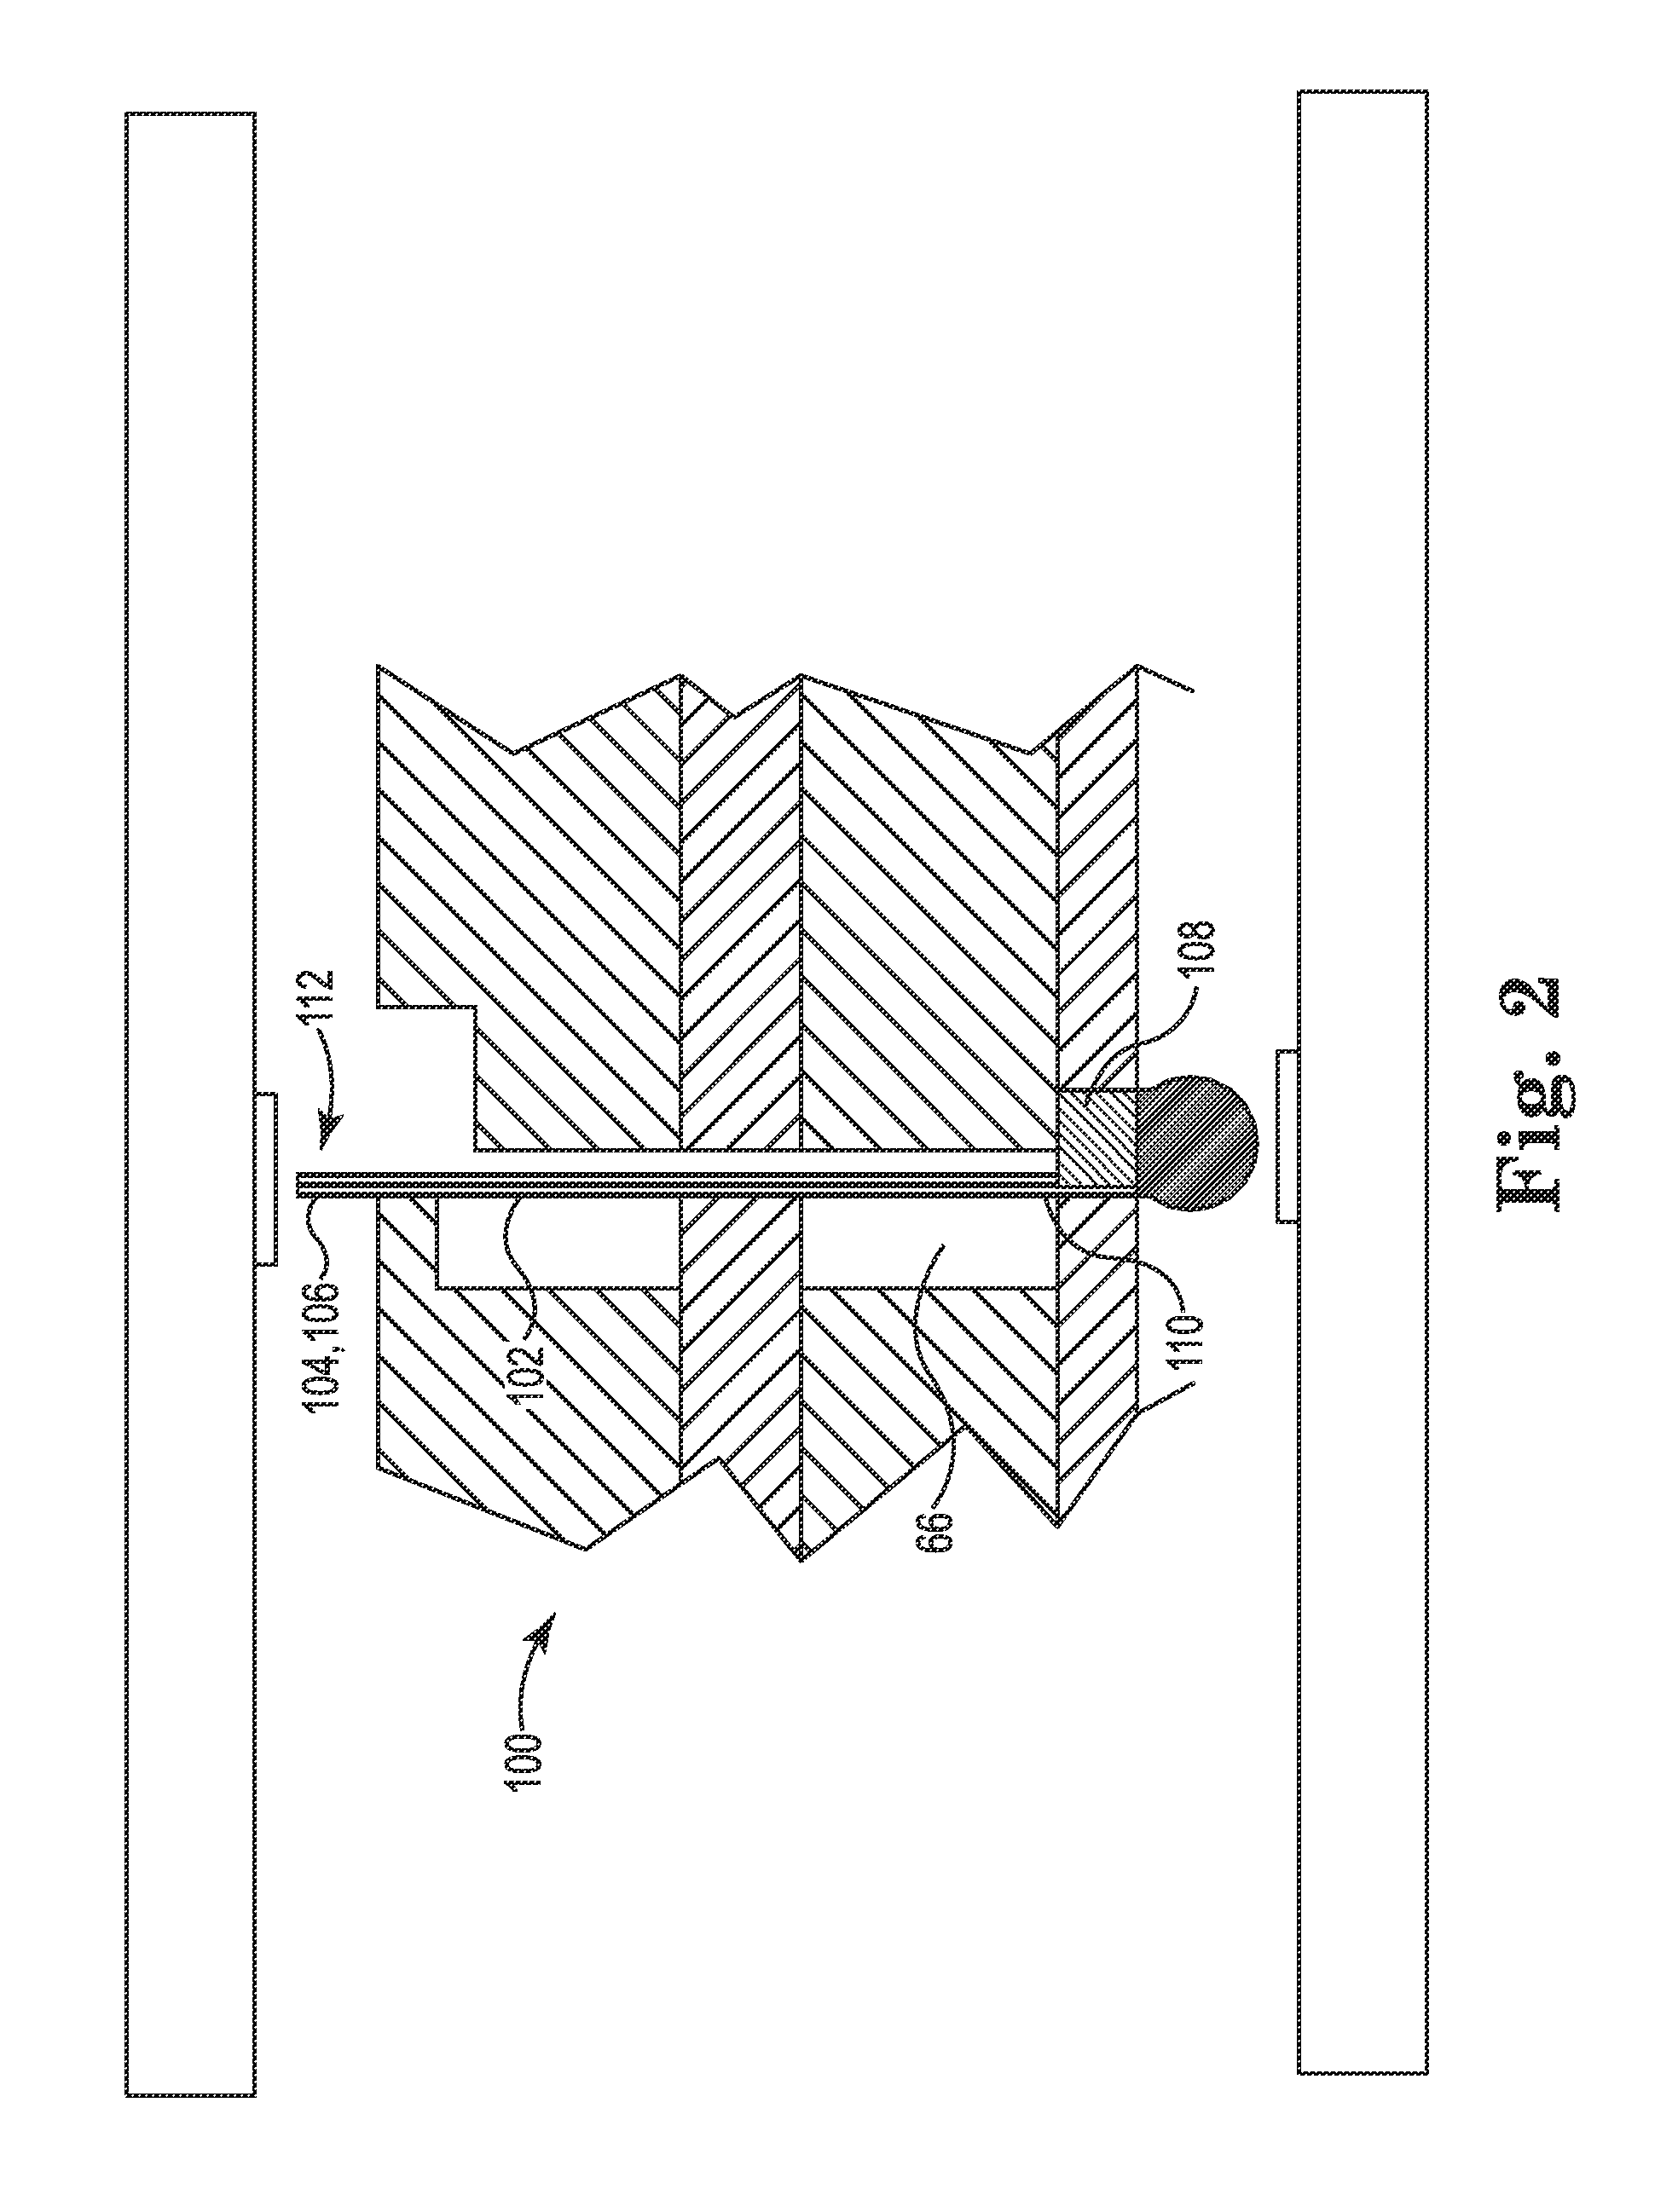 Method of making an electronic interconnect